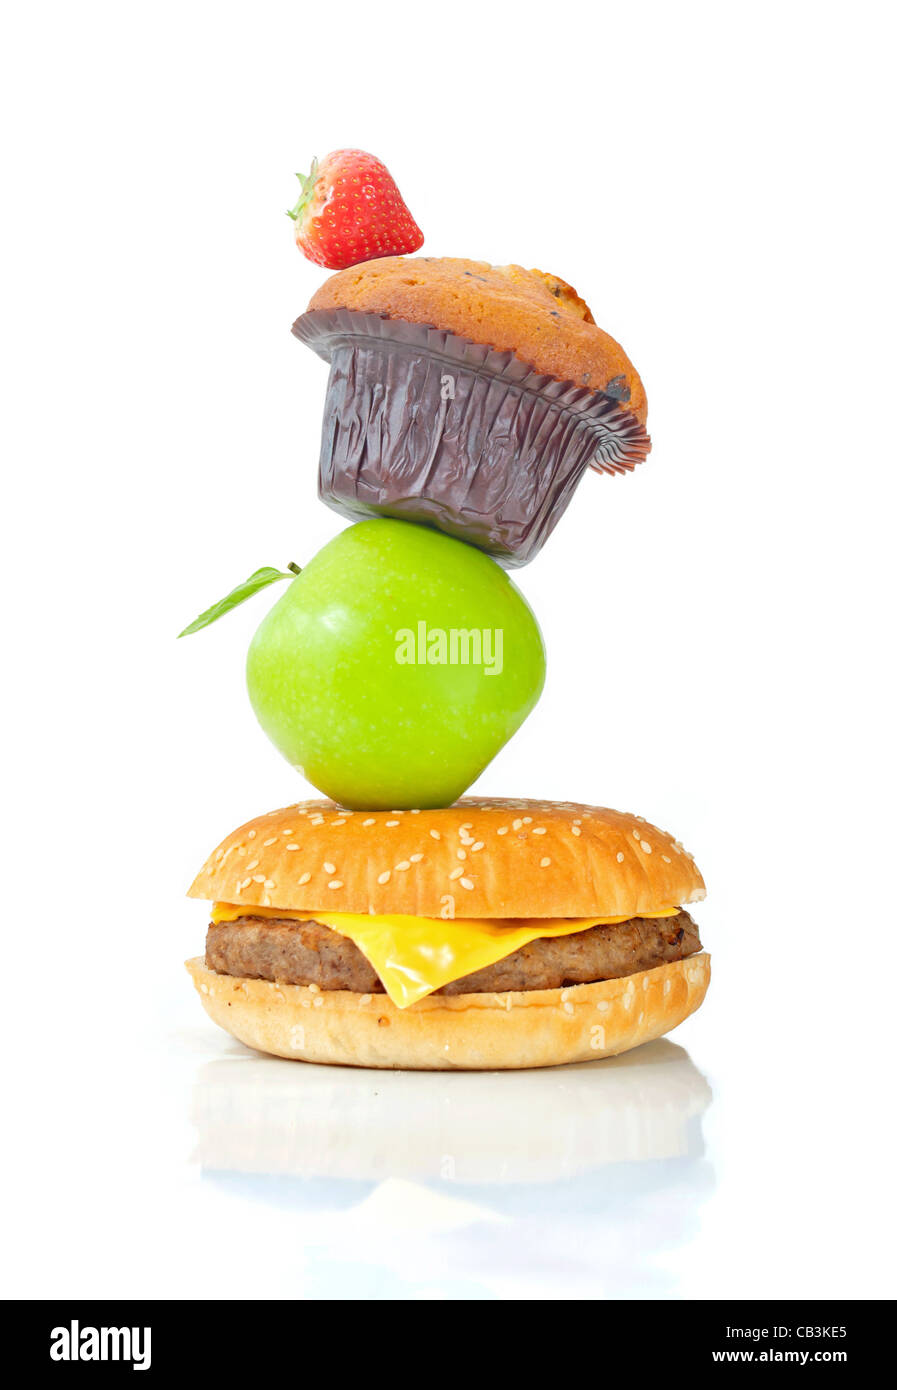 Stack of different foods both healthy and unhealthy Stock Photo